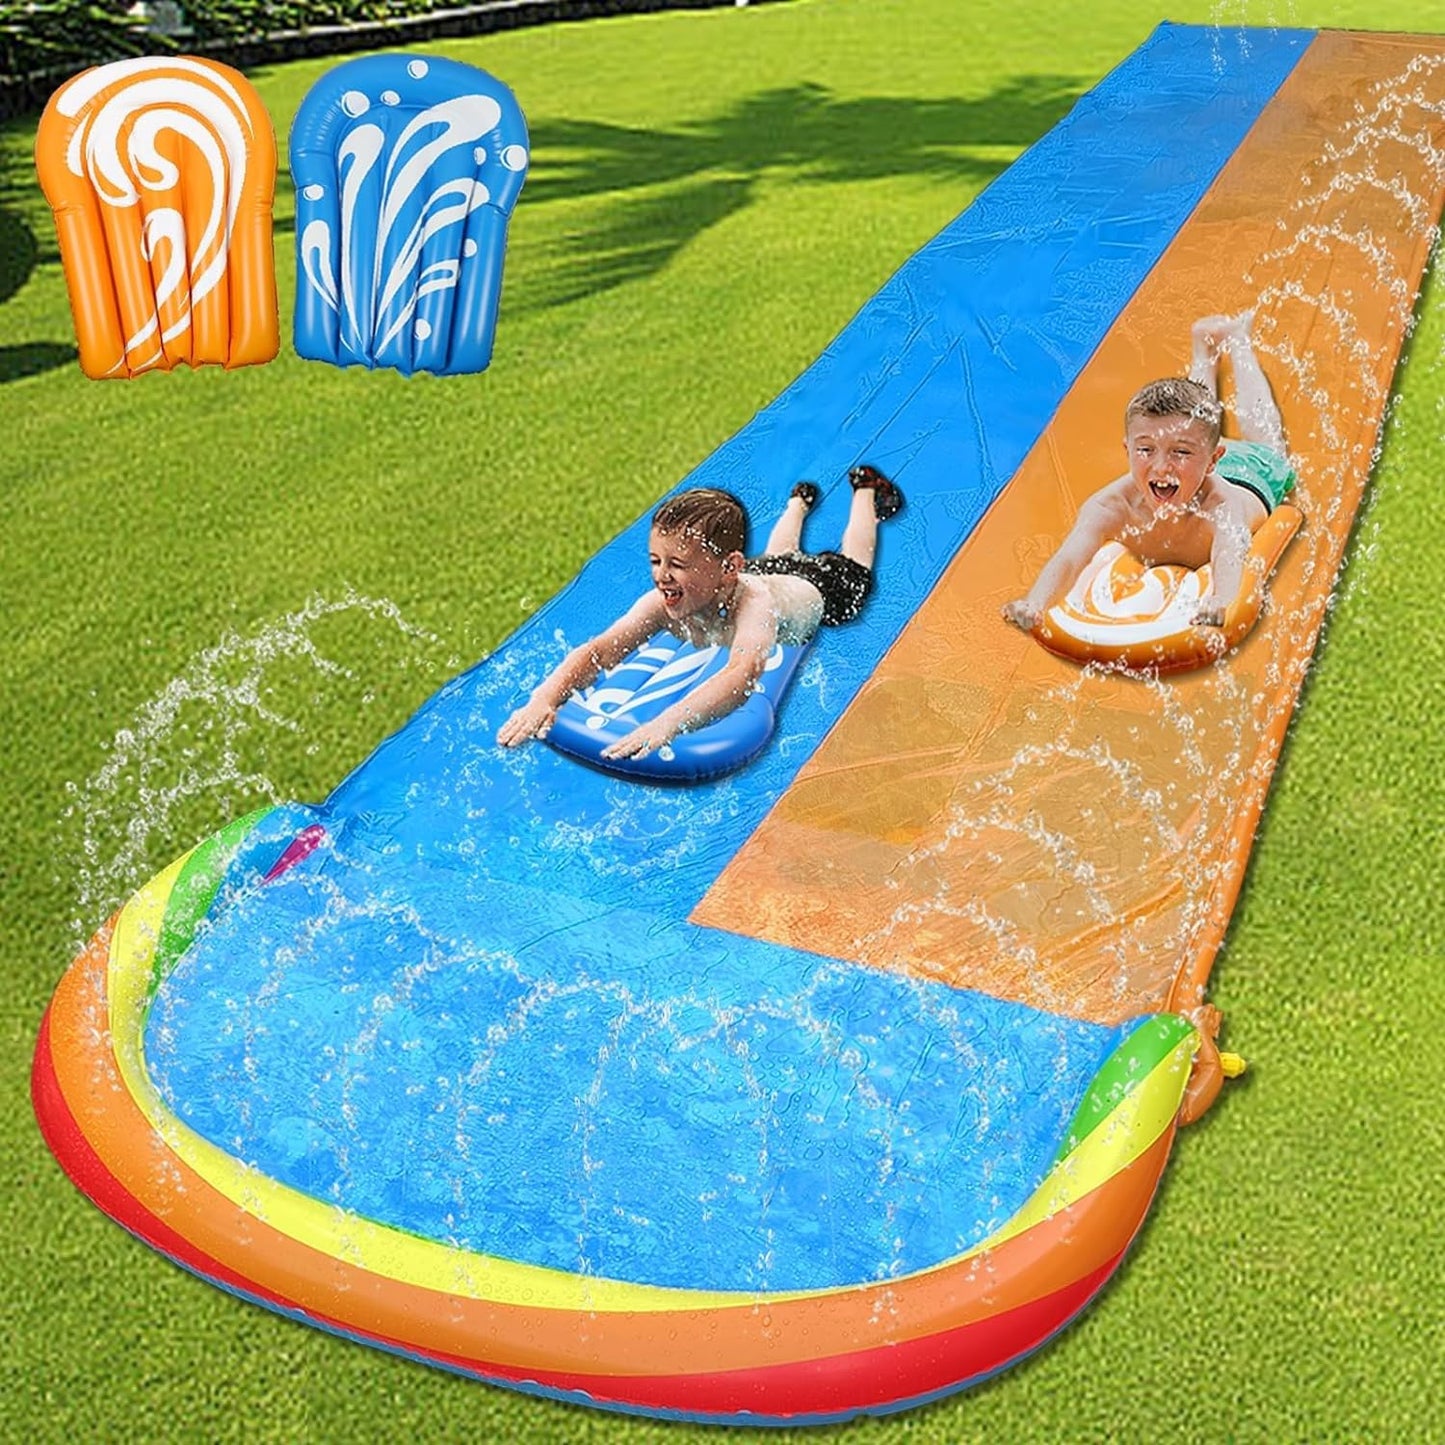 Slip Water Slide with Sprinklers, 22.5Ft Slip and Slide with 3 Inflatable Bodyboards and Splash Pool Waterslide for Kids Backyard Lawn Outdoor Water Toy